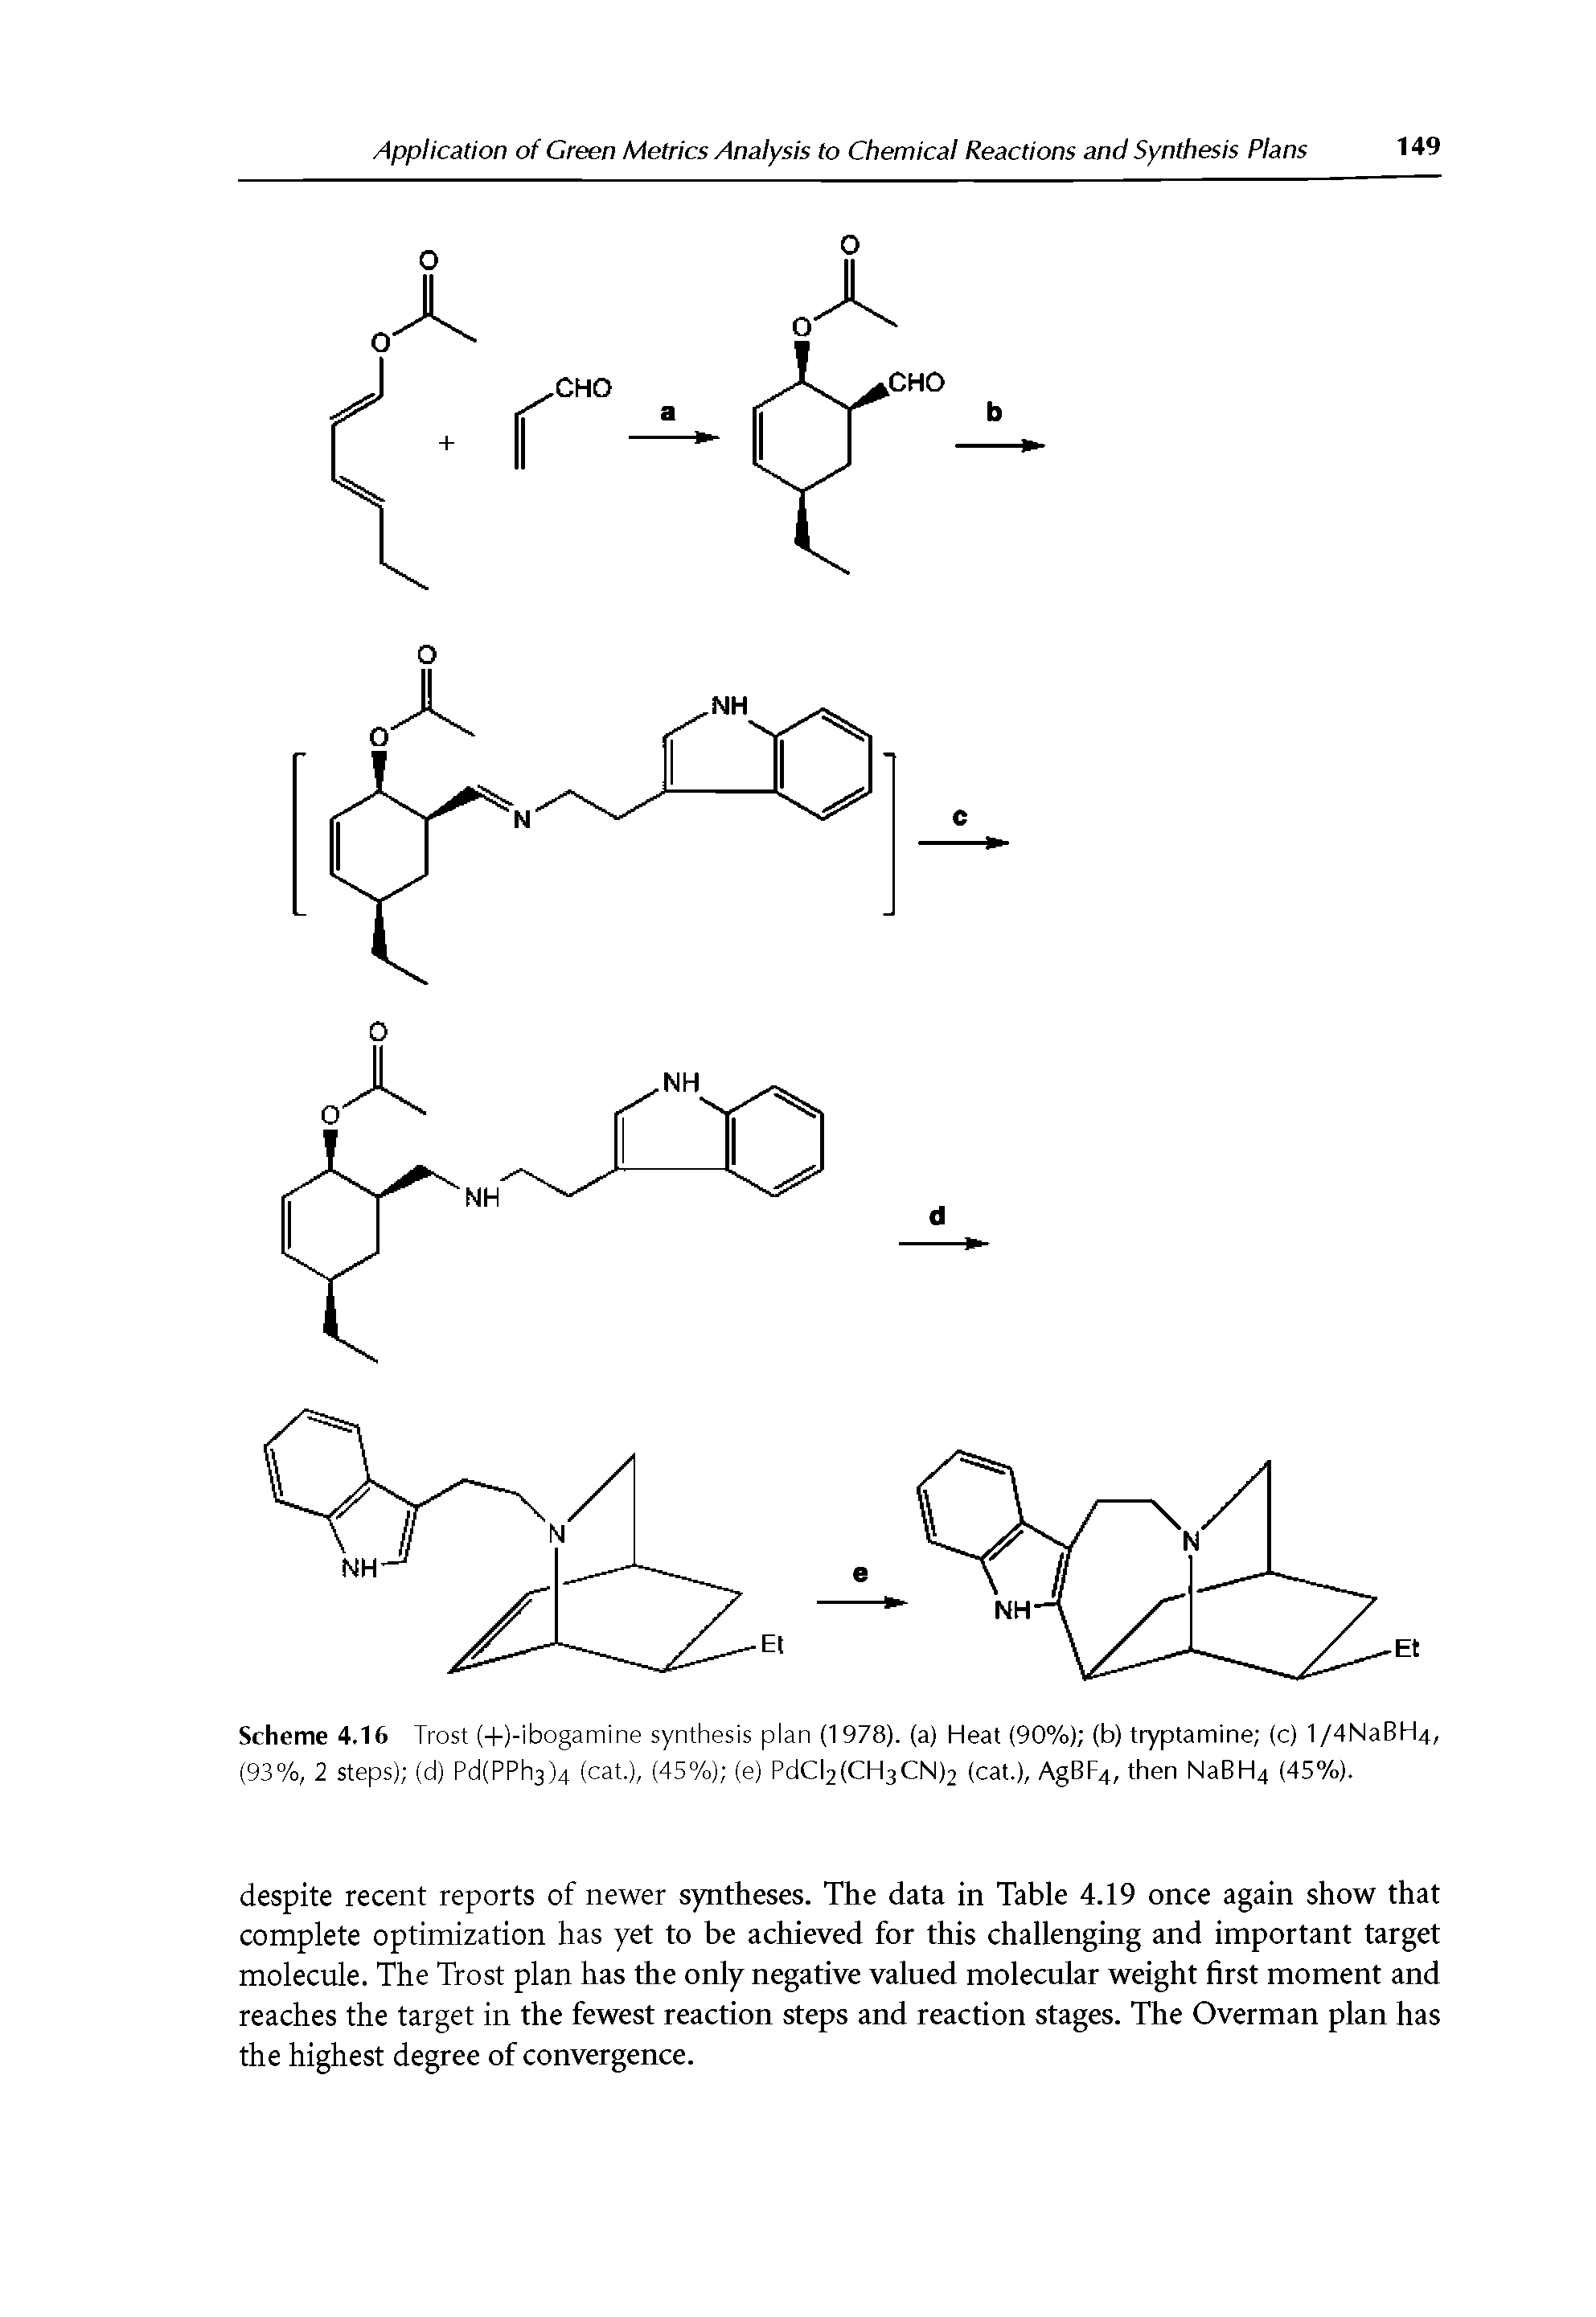 Scheme 4.16 Trost (+)-ibogamine synthesis plan (1 978). (a) Heat (90%) (b) tryptamine (c) 1/4NaBH4, (93%, 2 steps) (cl) Pd(PPh3)4 (cat.), (45%) (e) PdCl2(CH3CN)2 (cat.), AgBp4, then NaBH4 (45%).